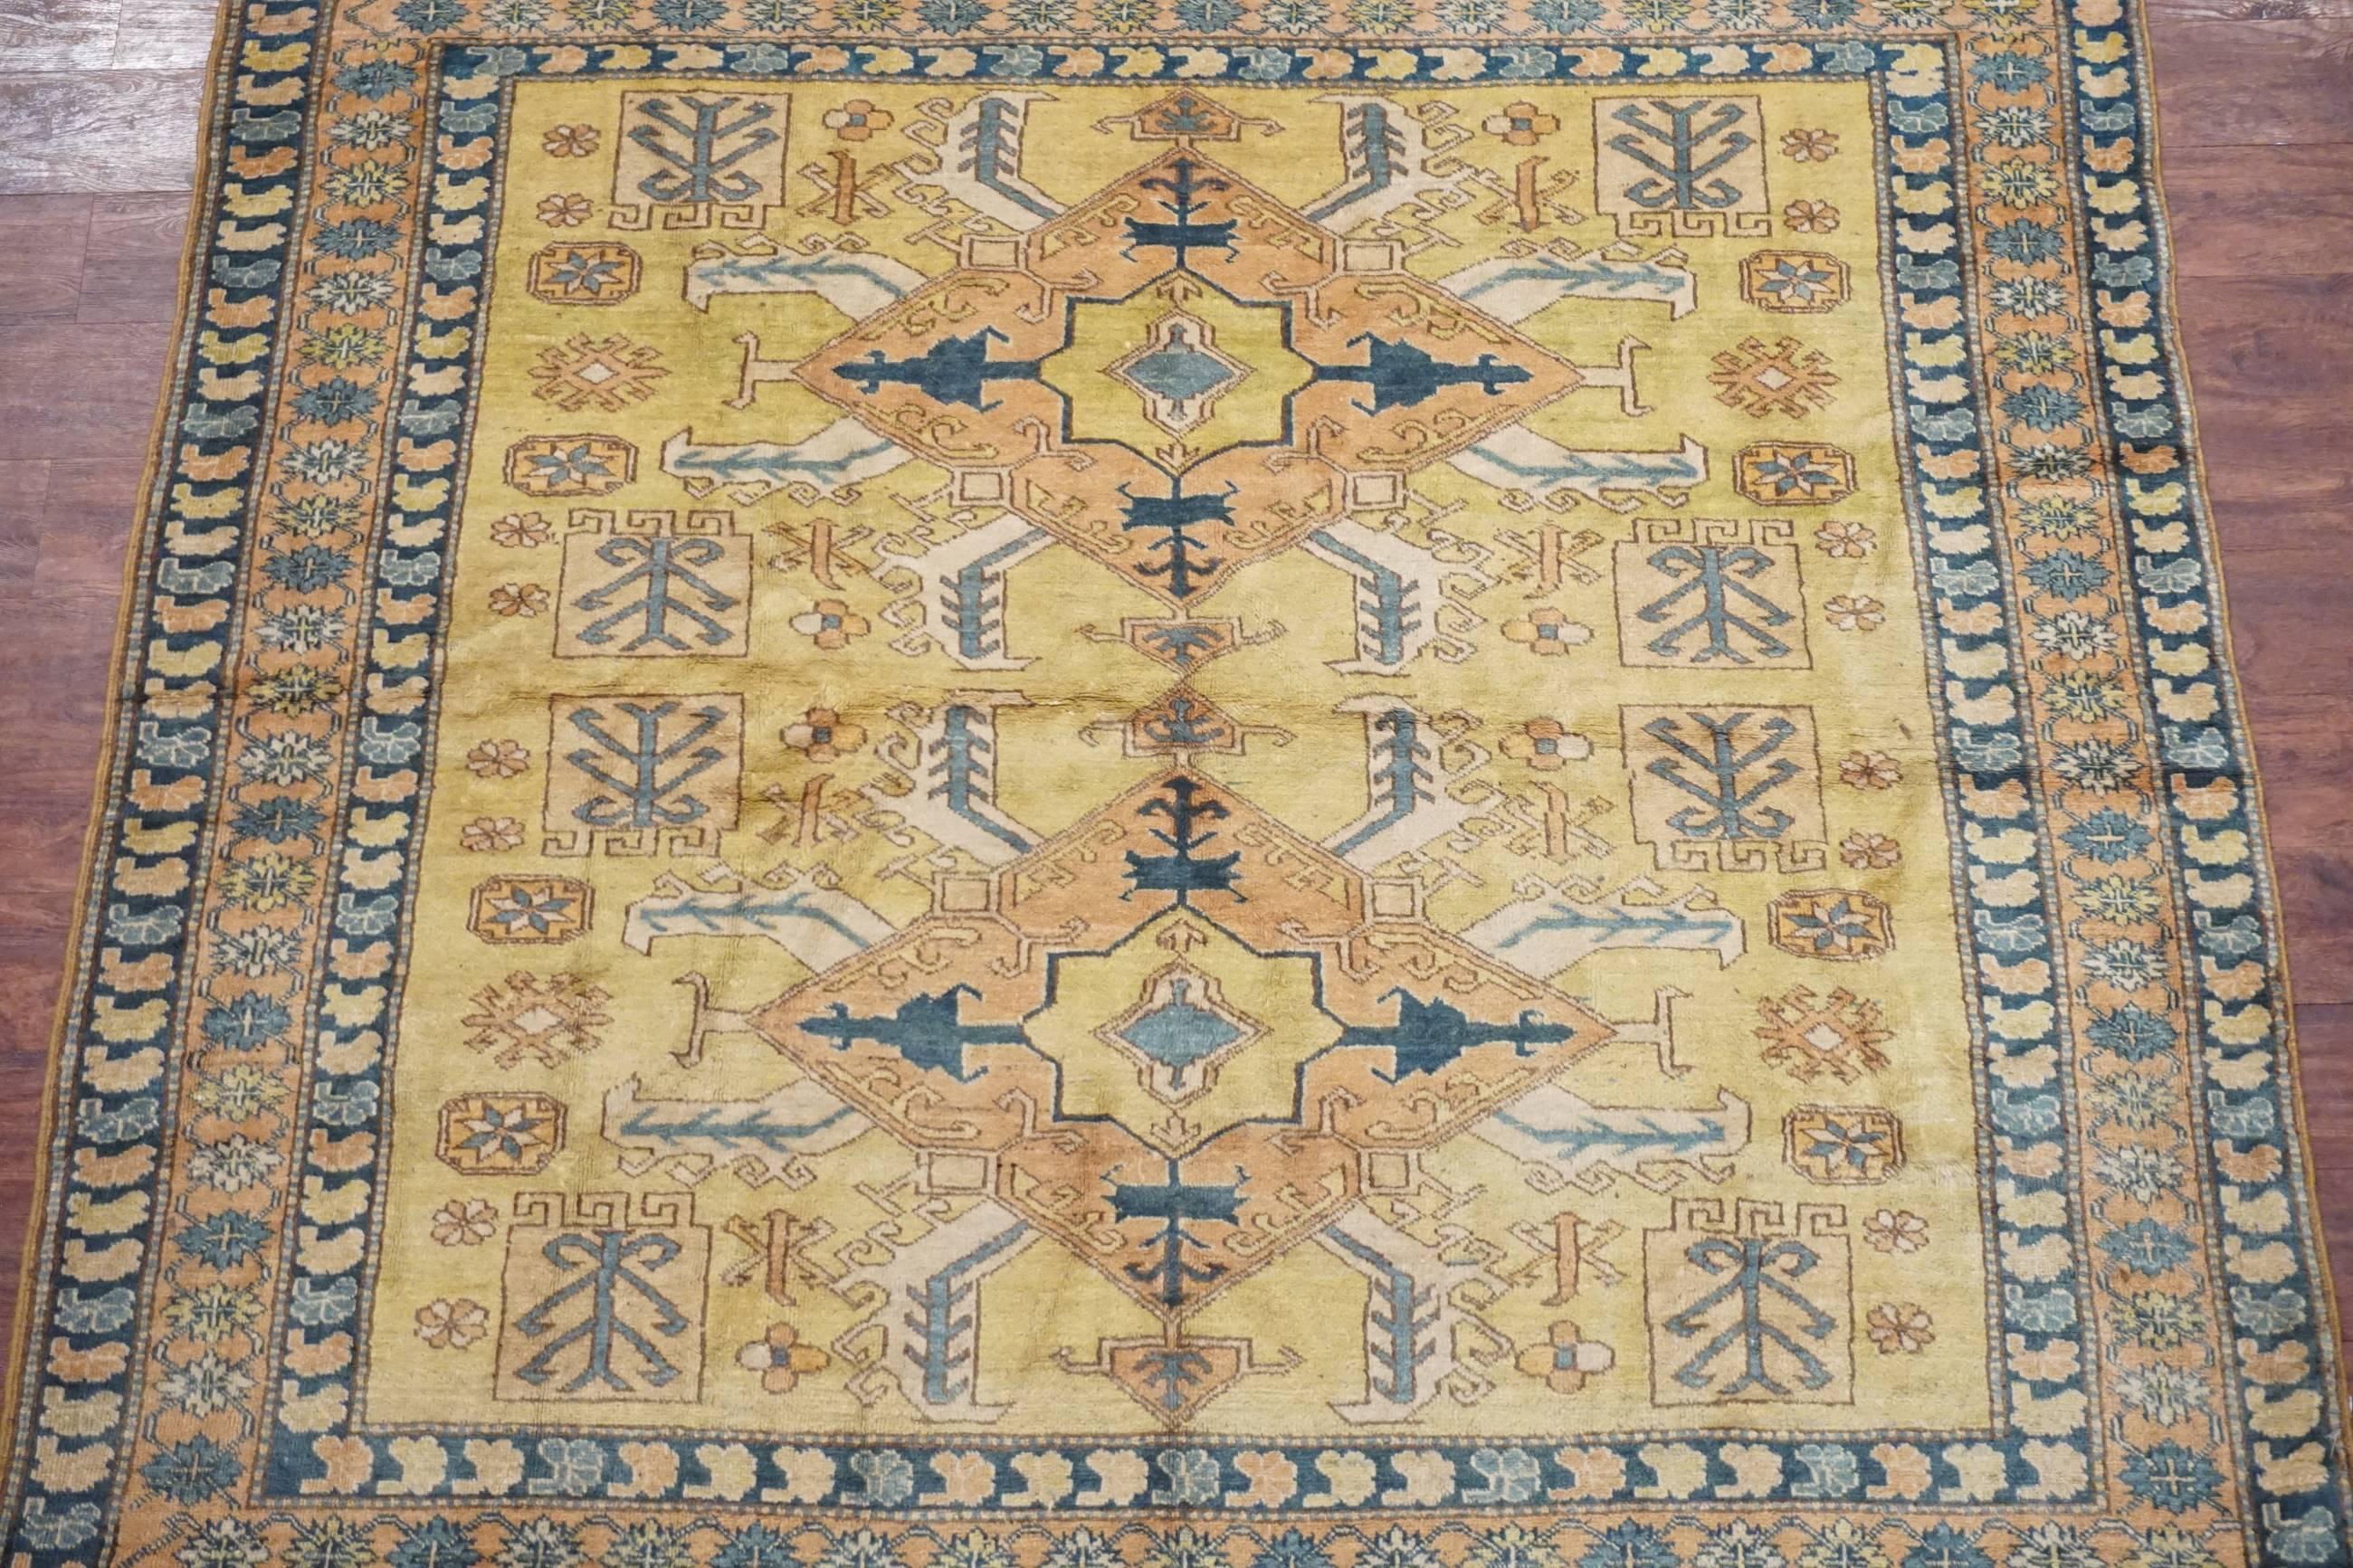 Antique square Caucasus Kazak rug

circa 1900

Measure: 6' x 6'

Hand-knotted wool pile on a cotton foundation

Field color: Gold
Border color: Salmon
Accent color: Ivory, navy-blue, light-blue.